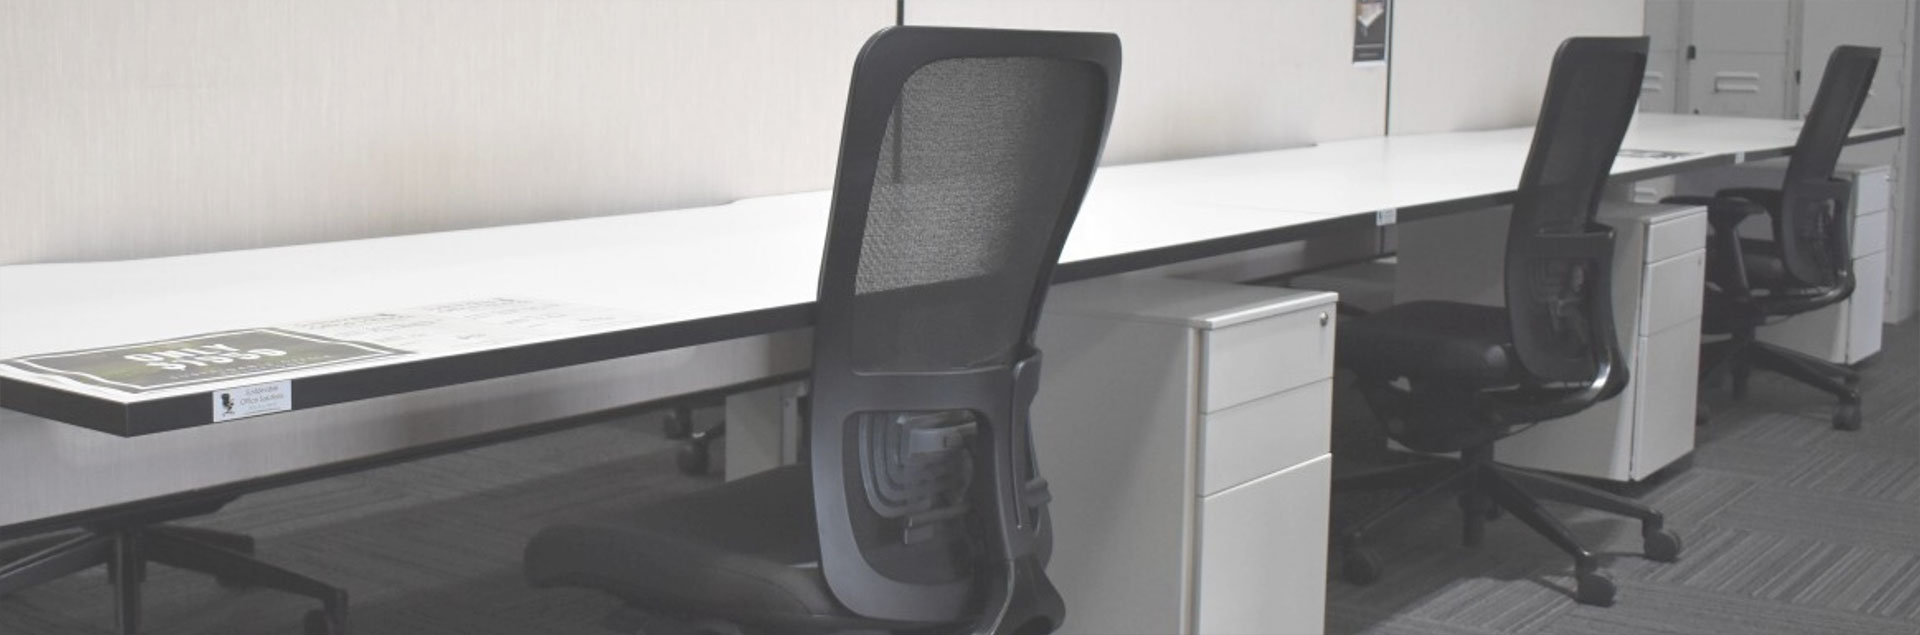 Contact Clean & Gone about buying old office furniture